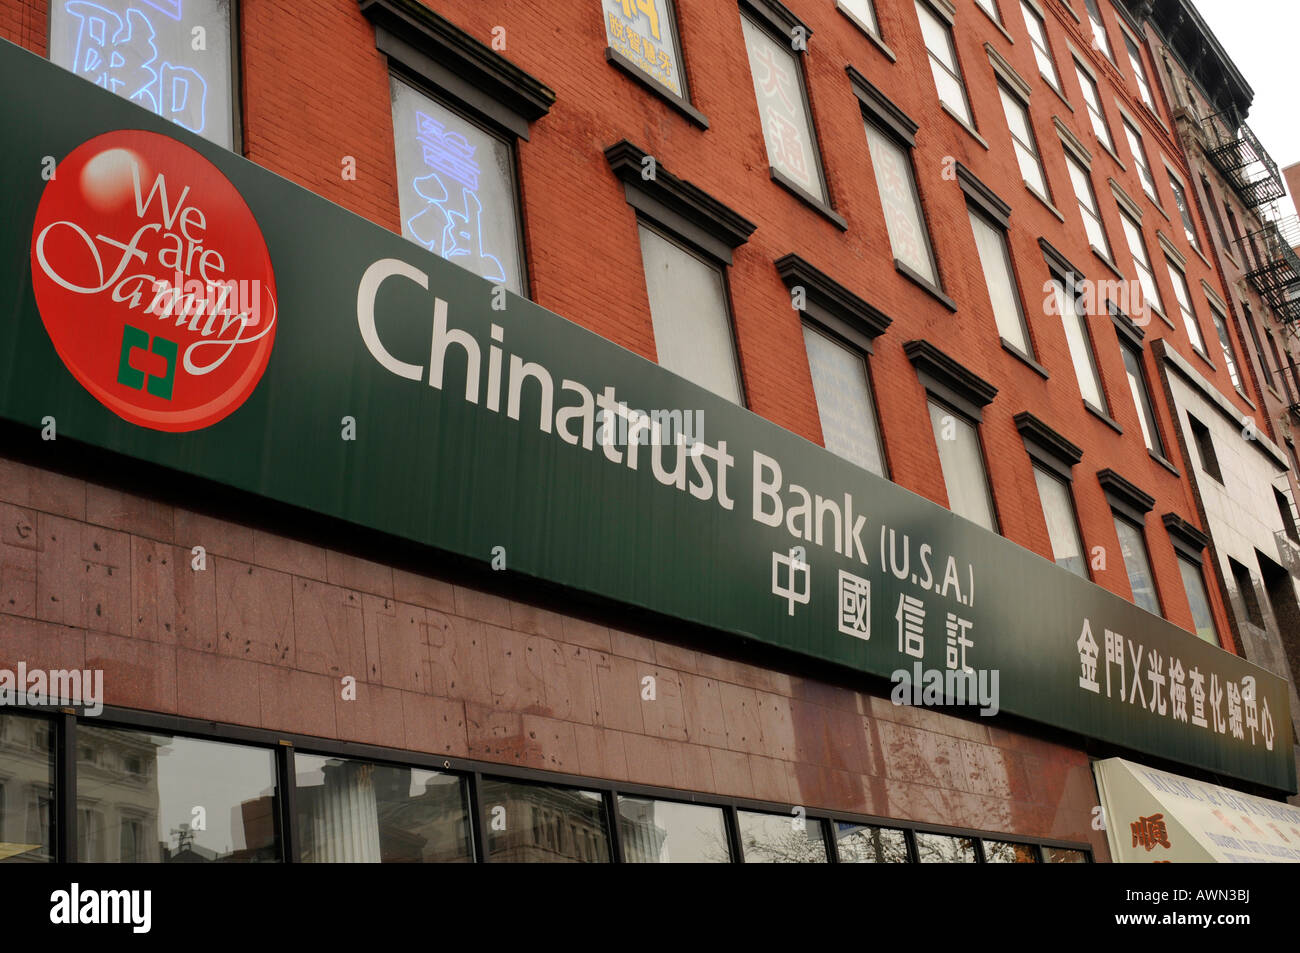 Chinatrust Bank, Chinatown, New York, USA Banque D'Images